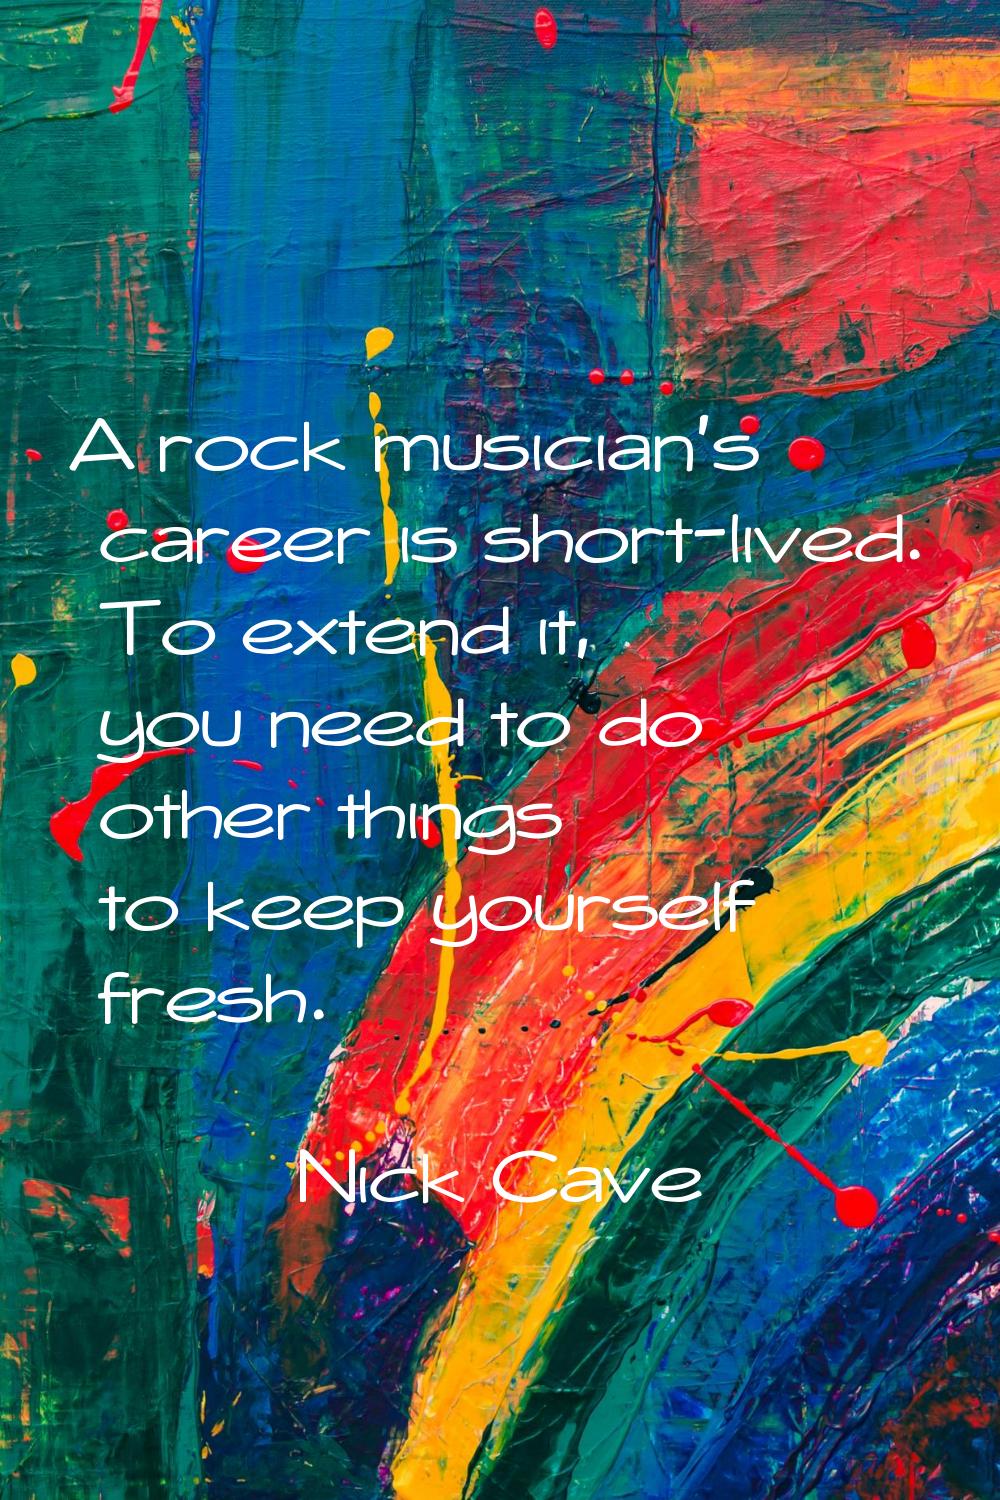 A rock musician's career is short-lived. To extend it, you need to do other things to keep yourself